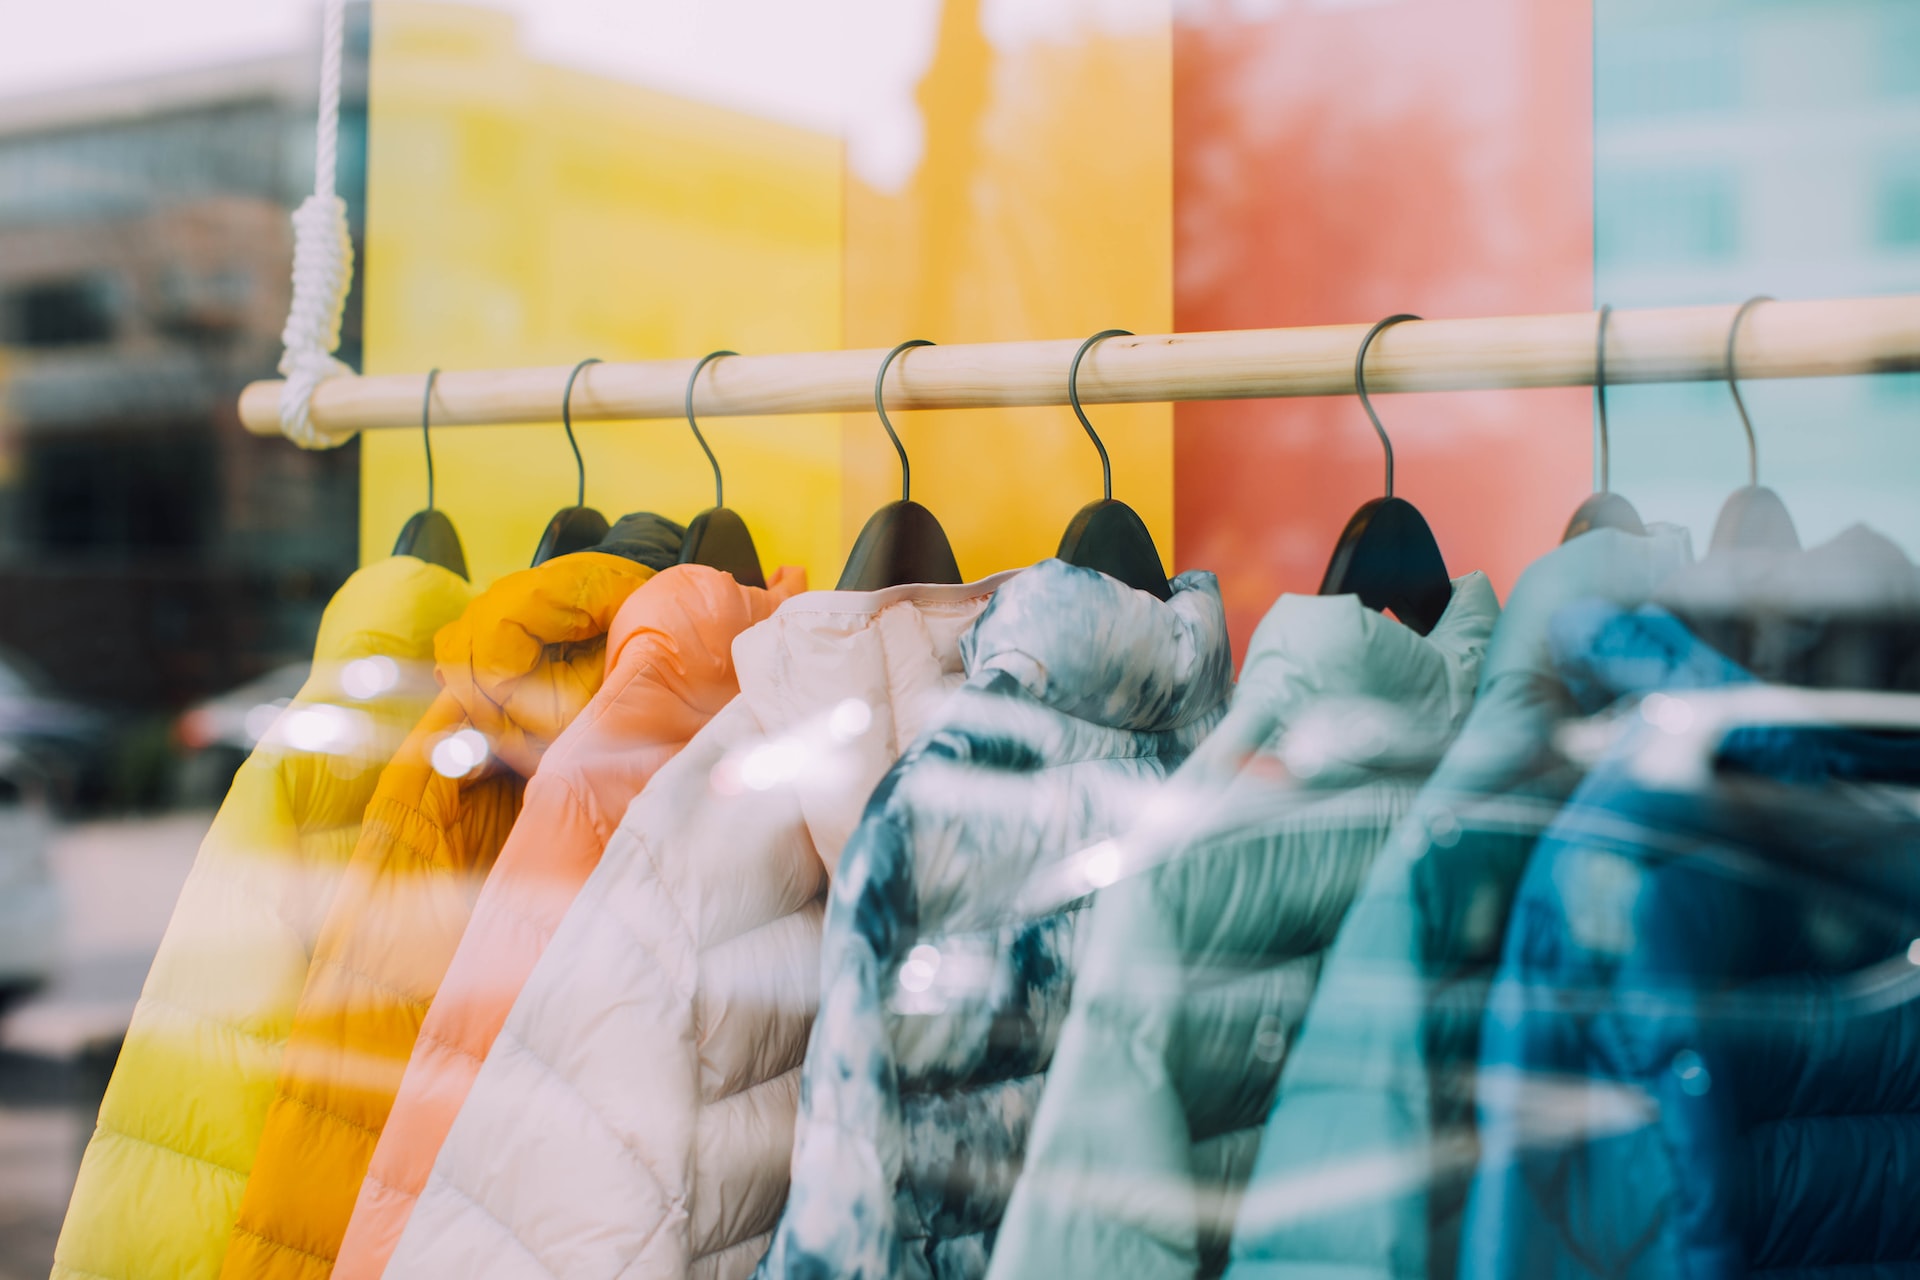 yellow, orange, pink, green and blue puffer jackets hang in a store window